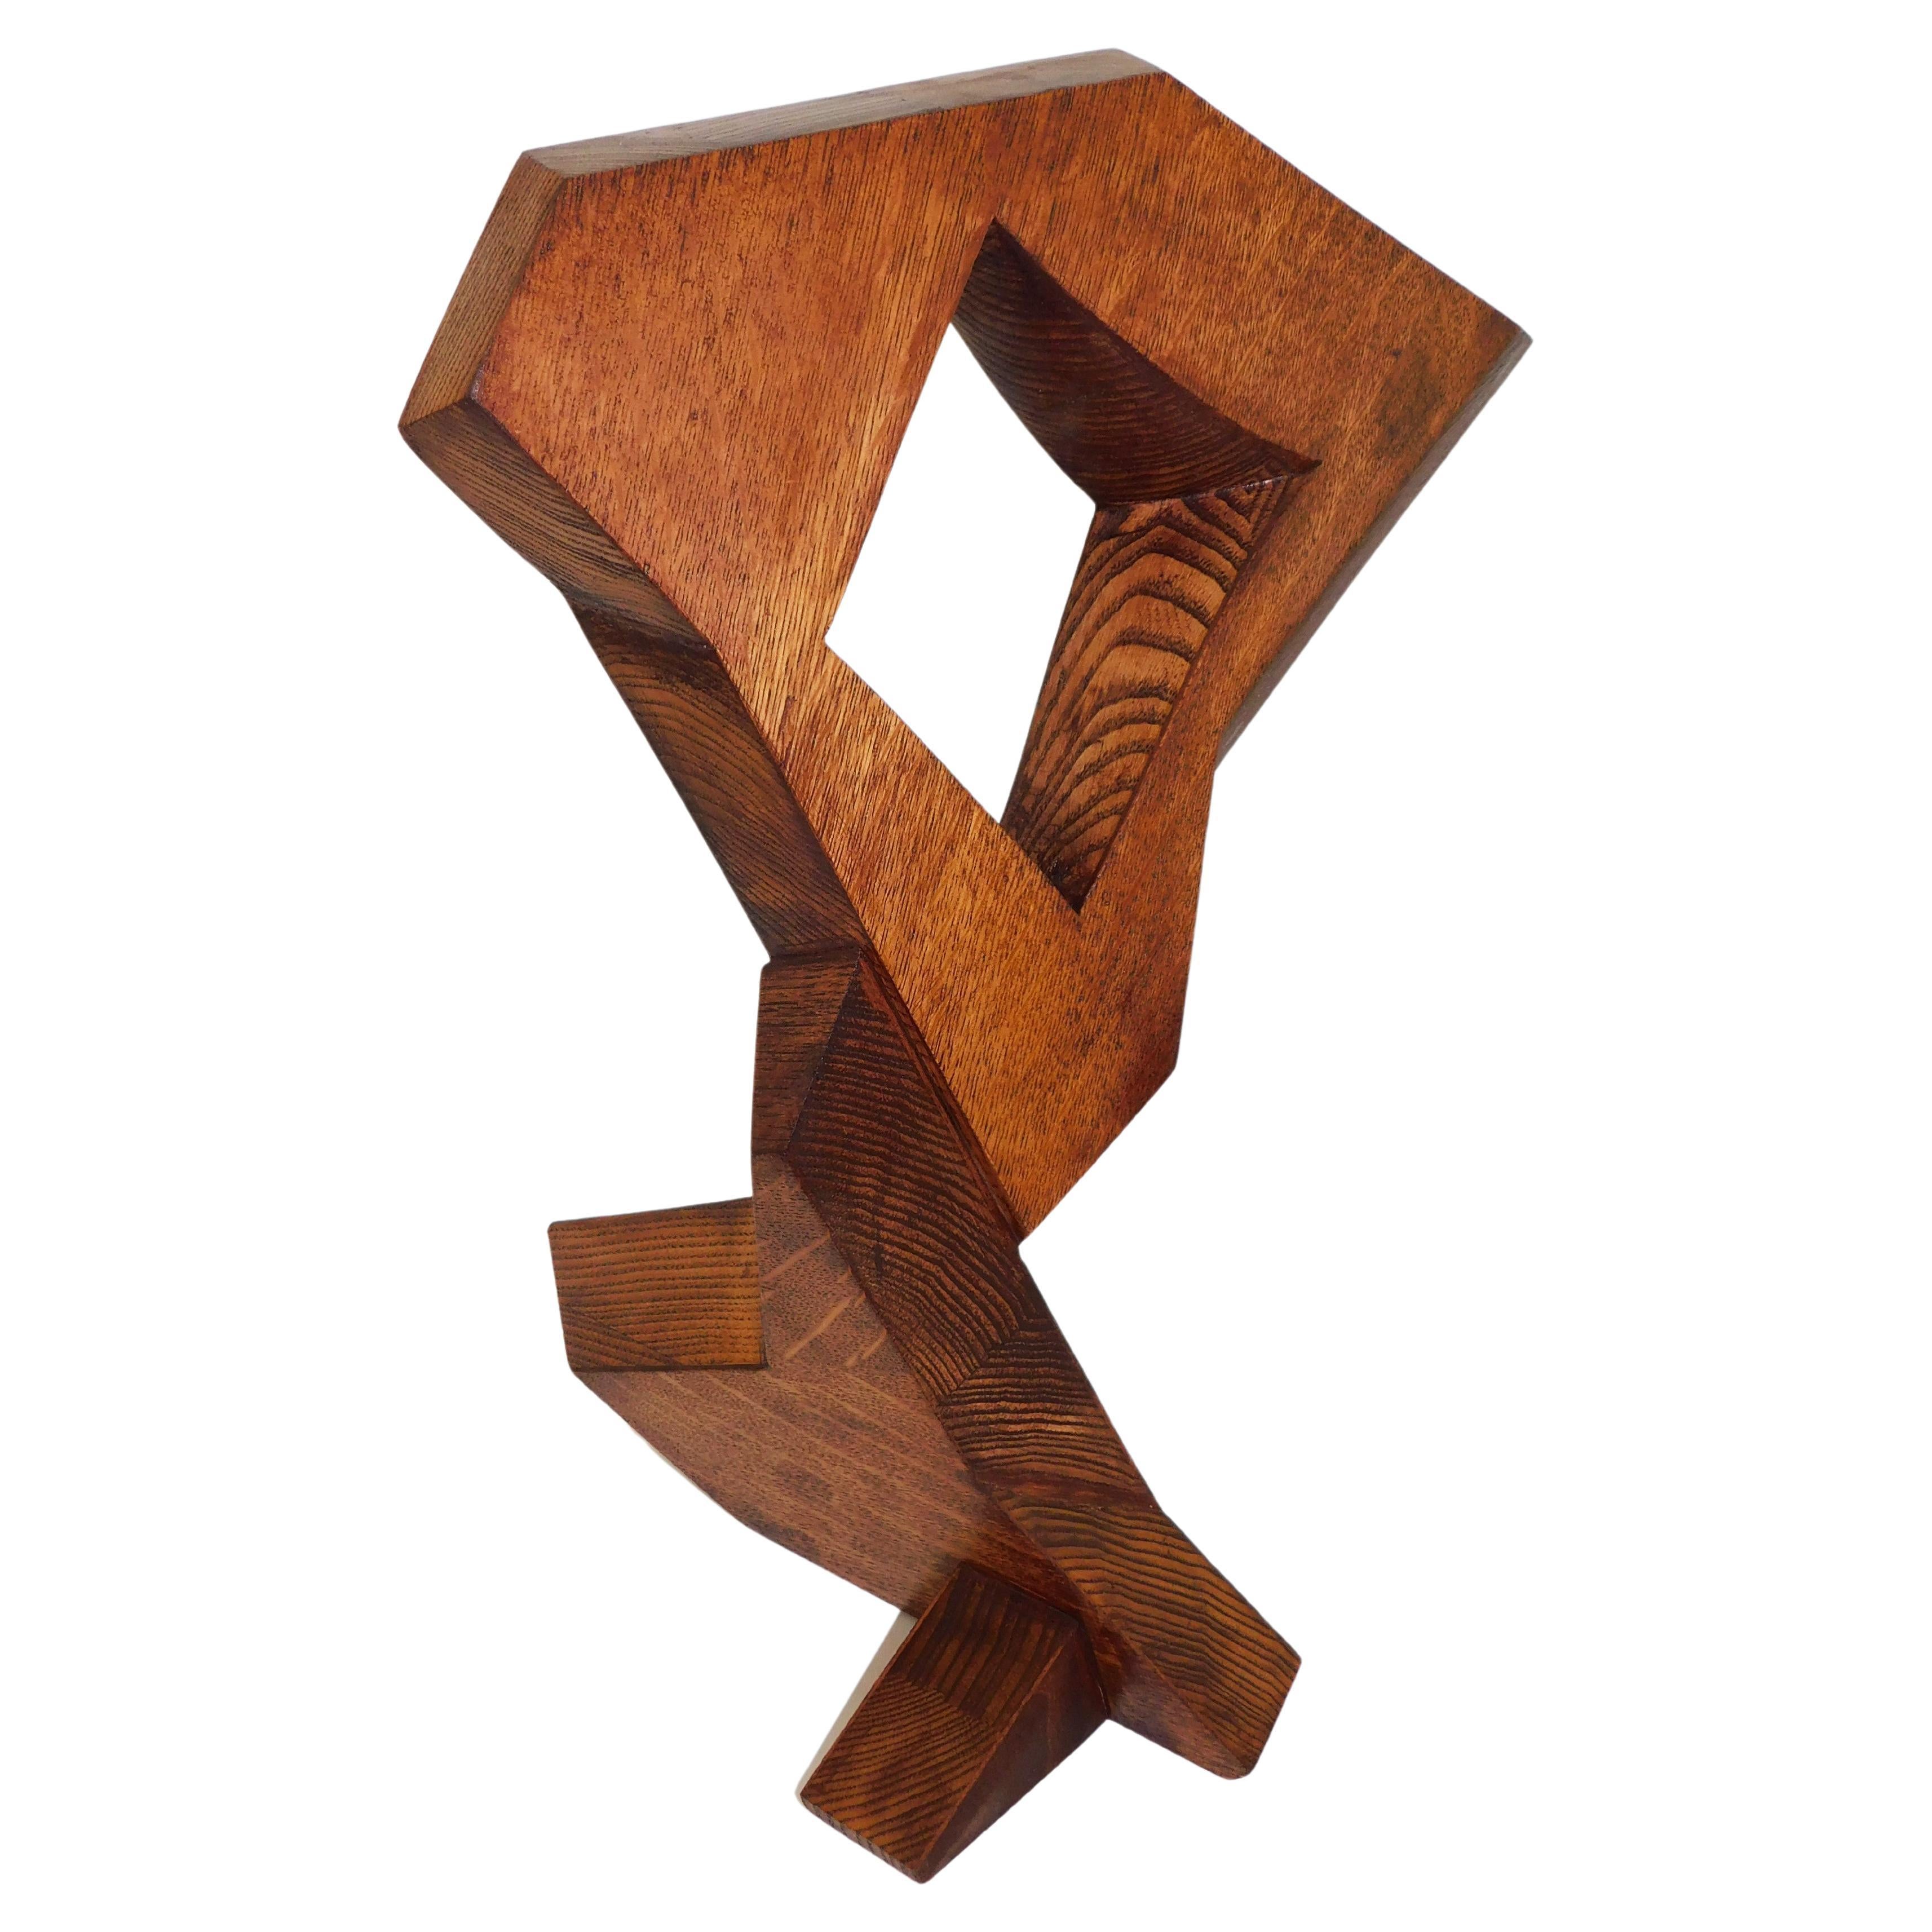 Signed Modern Abstract Constructivist Styled Wooden Oak Sculpture Czeslaw Budny For Sale